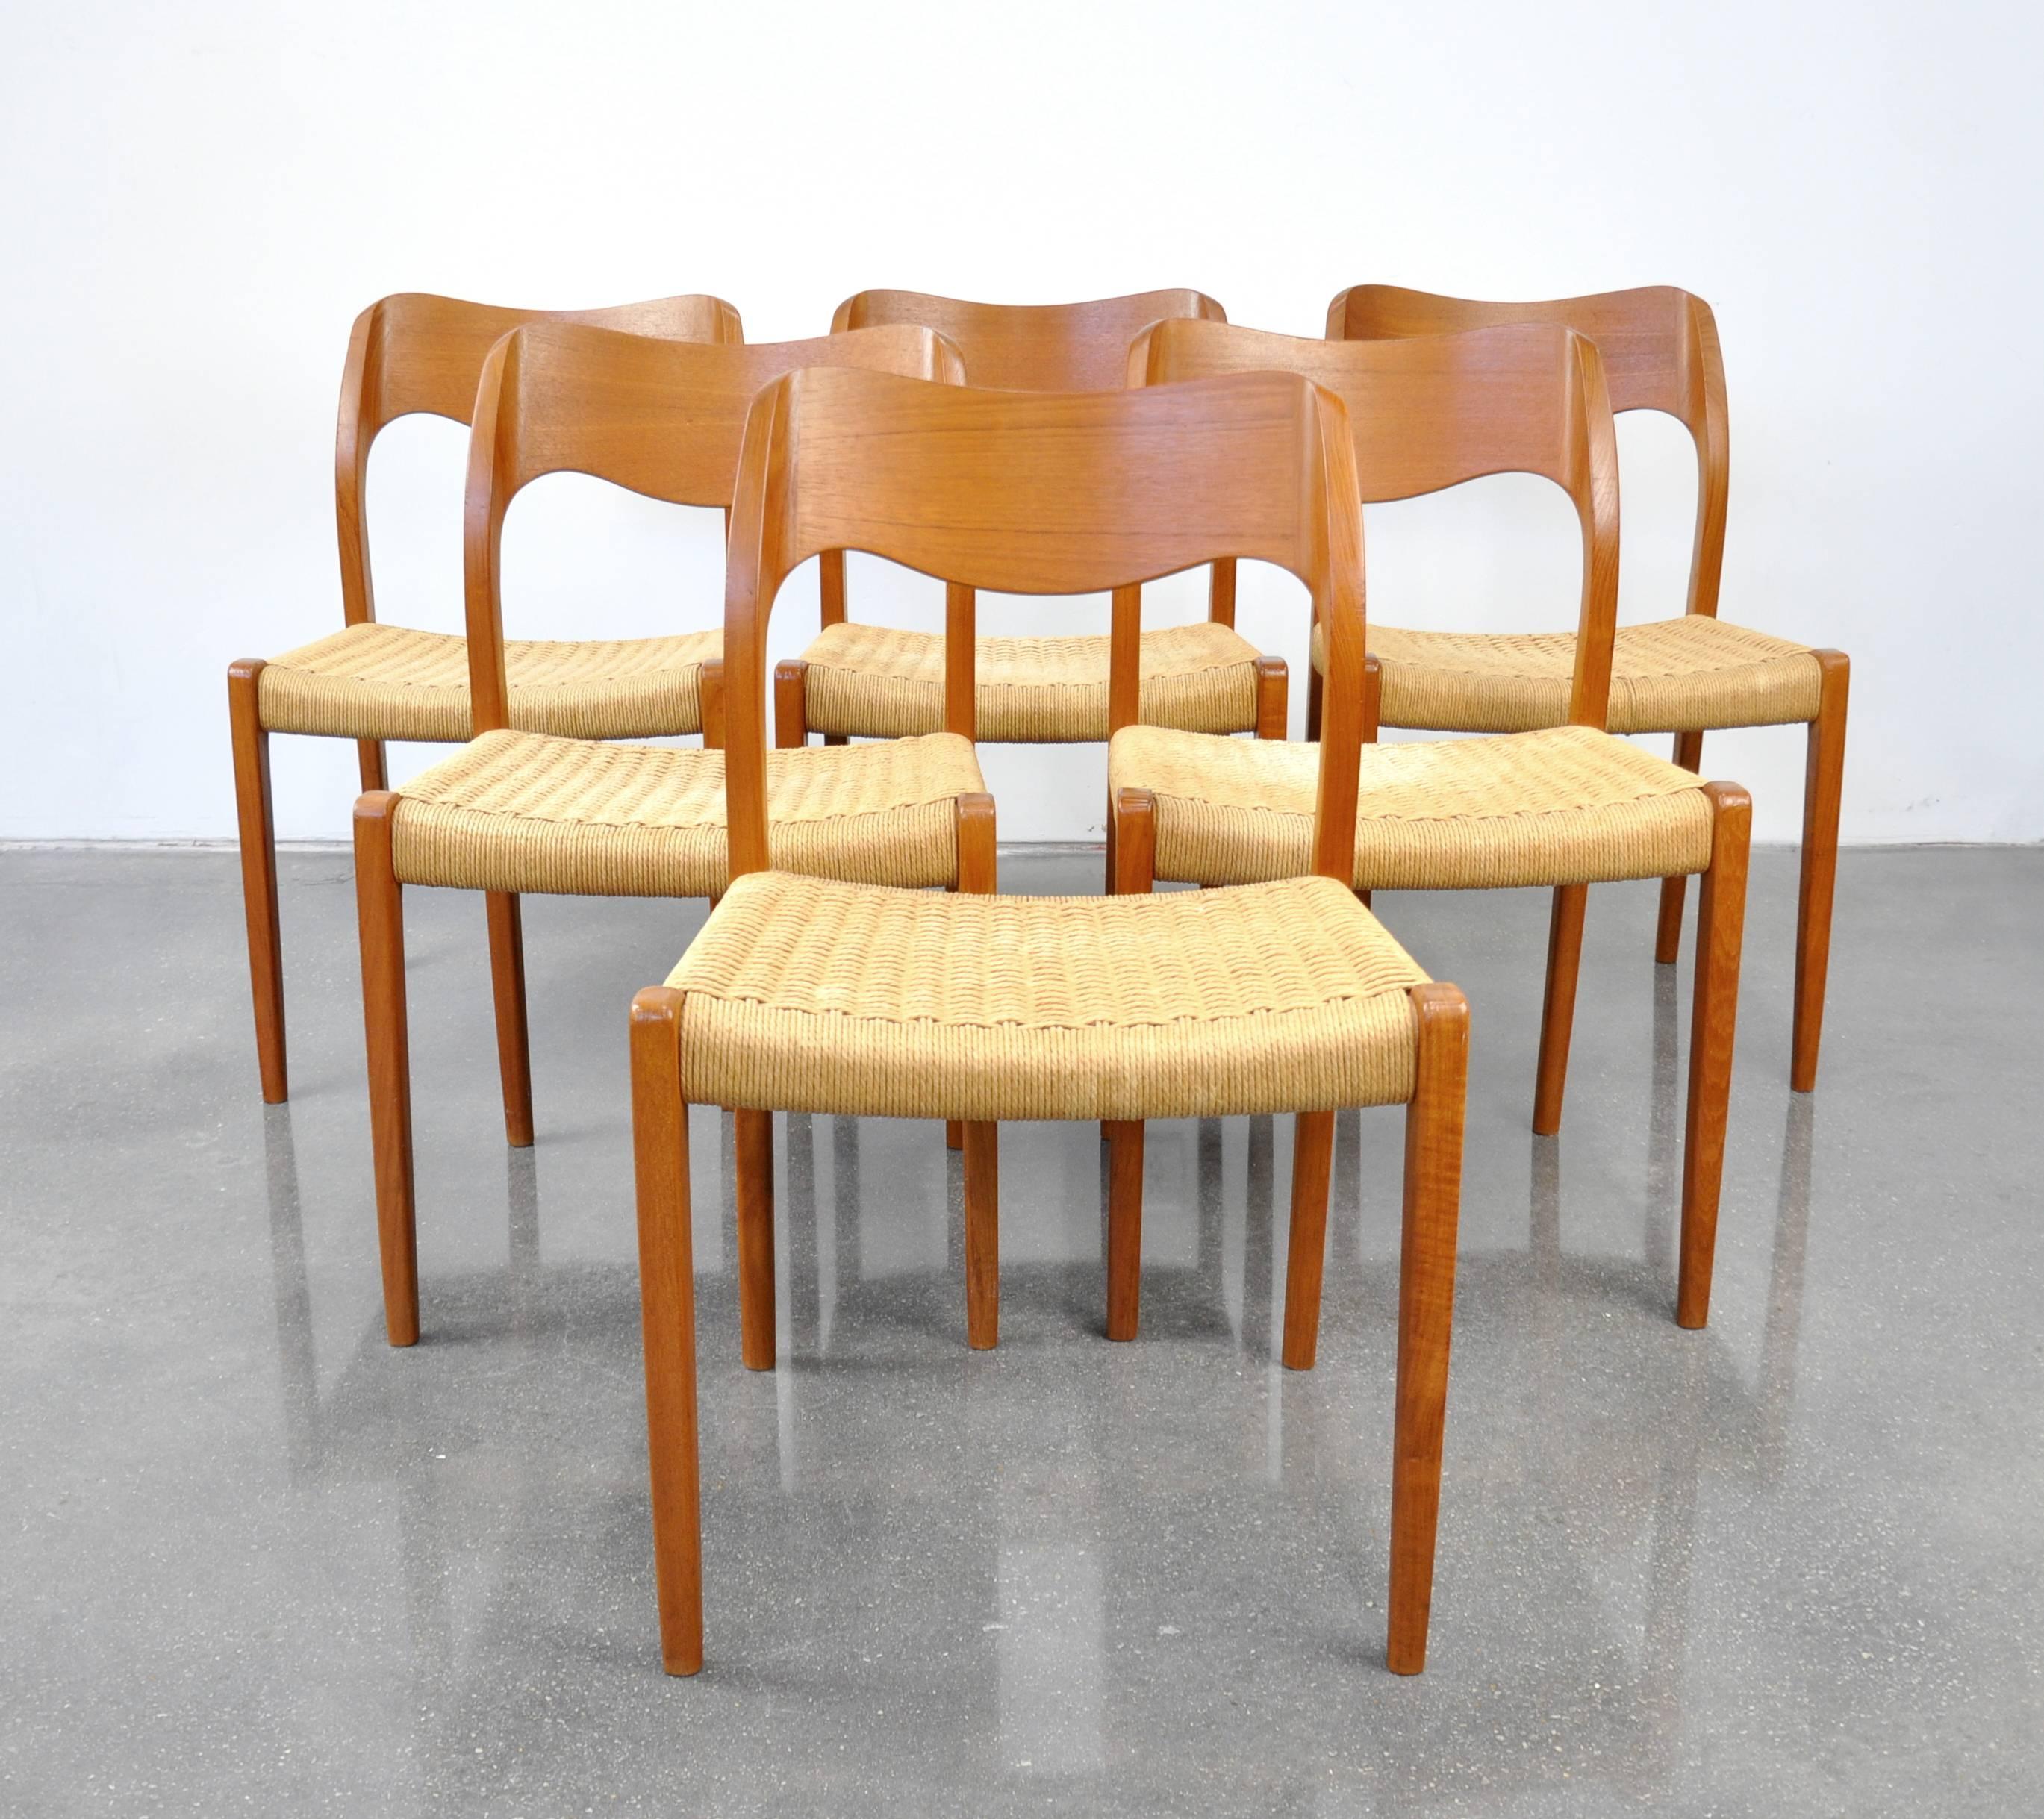 A vintage Mid-Century Modern teak dining set including a professionally restored draw-leaf extension dining table and a set of six model #71 chairs designed by Arne Hovmand-Olsen for J.L. Møllers Møbelfabrik in Denmark, dating from the 1960s. The